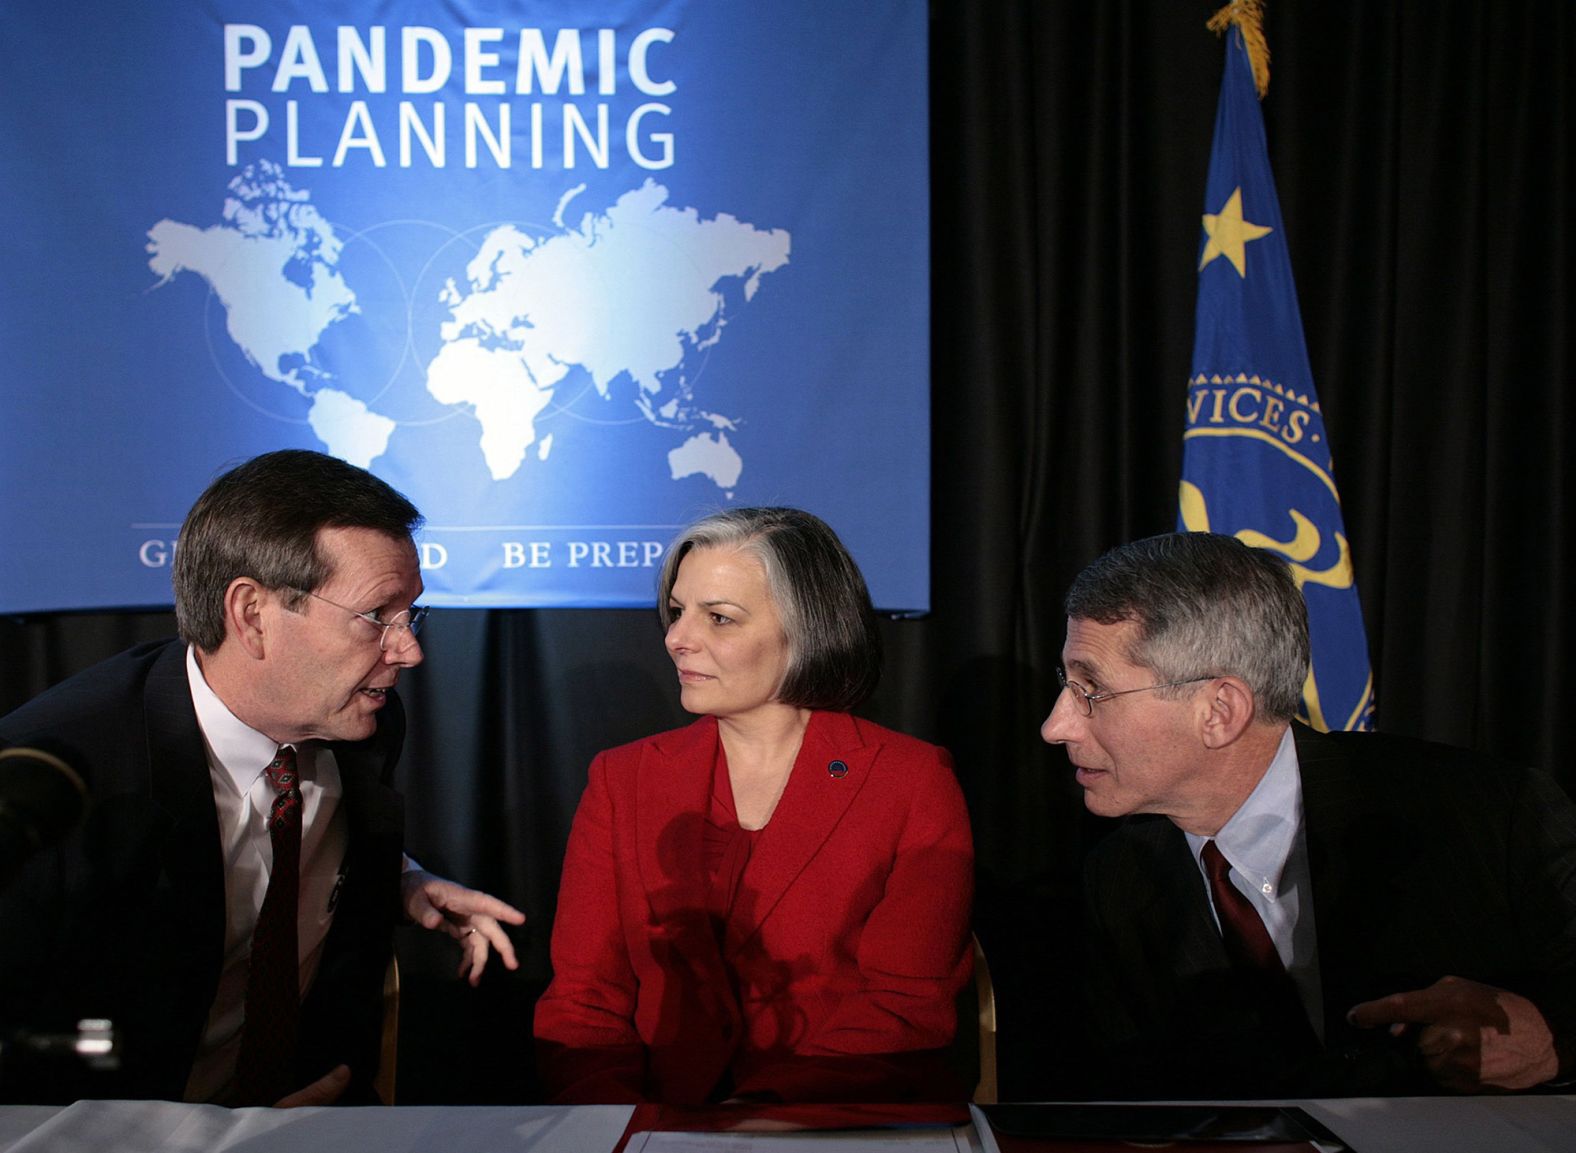 Fauci, right, speaks with Health and Human Services Secretary Mike Leavitt at a pandemic planning conference in Washington in 2005. At center is Dr. Julie Gerberding, director of the Centers for Disease Control and Prevention.